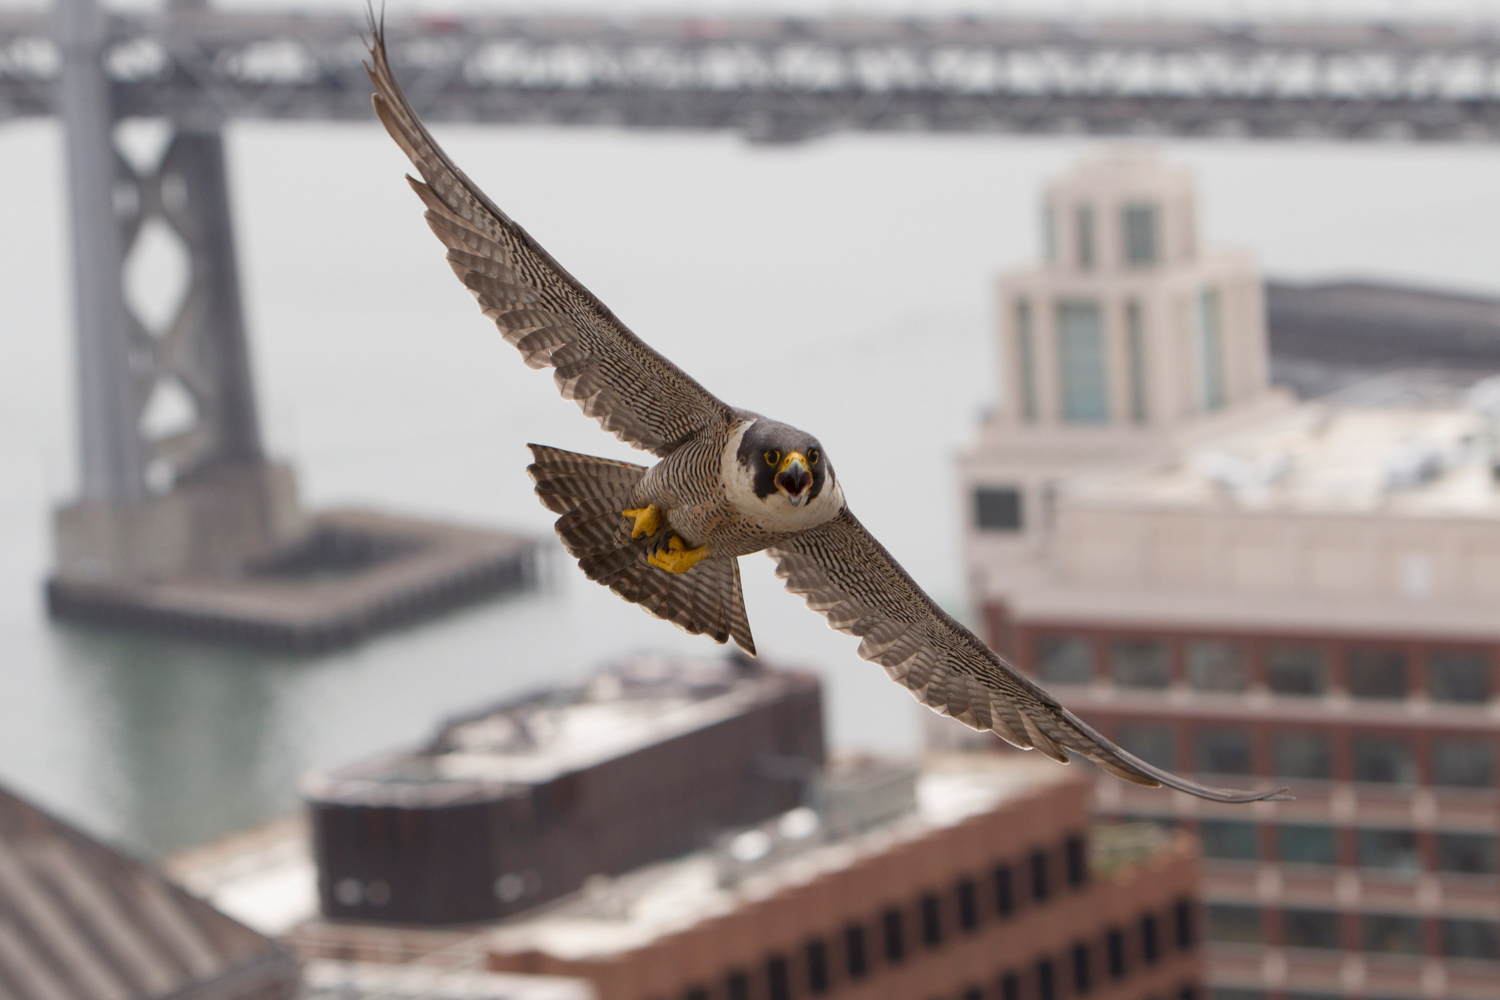 Peregrine Falcon photographed from 77 Beale, image courtesy PG&E